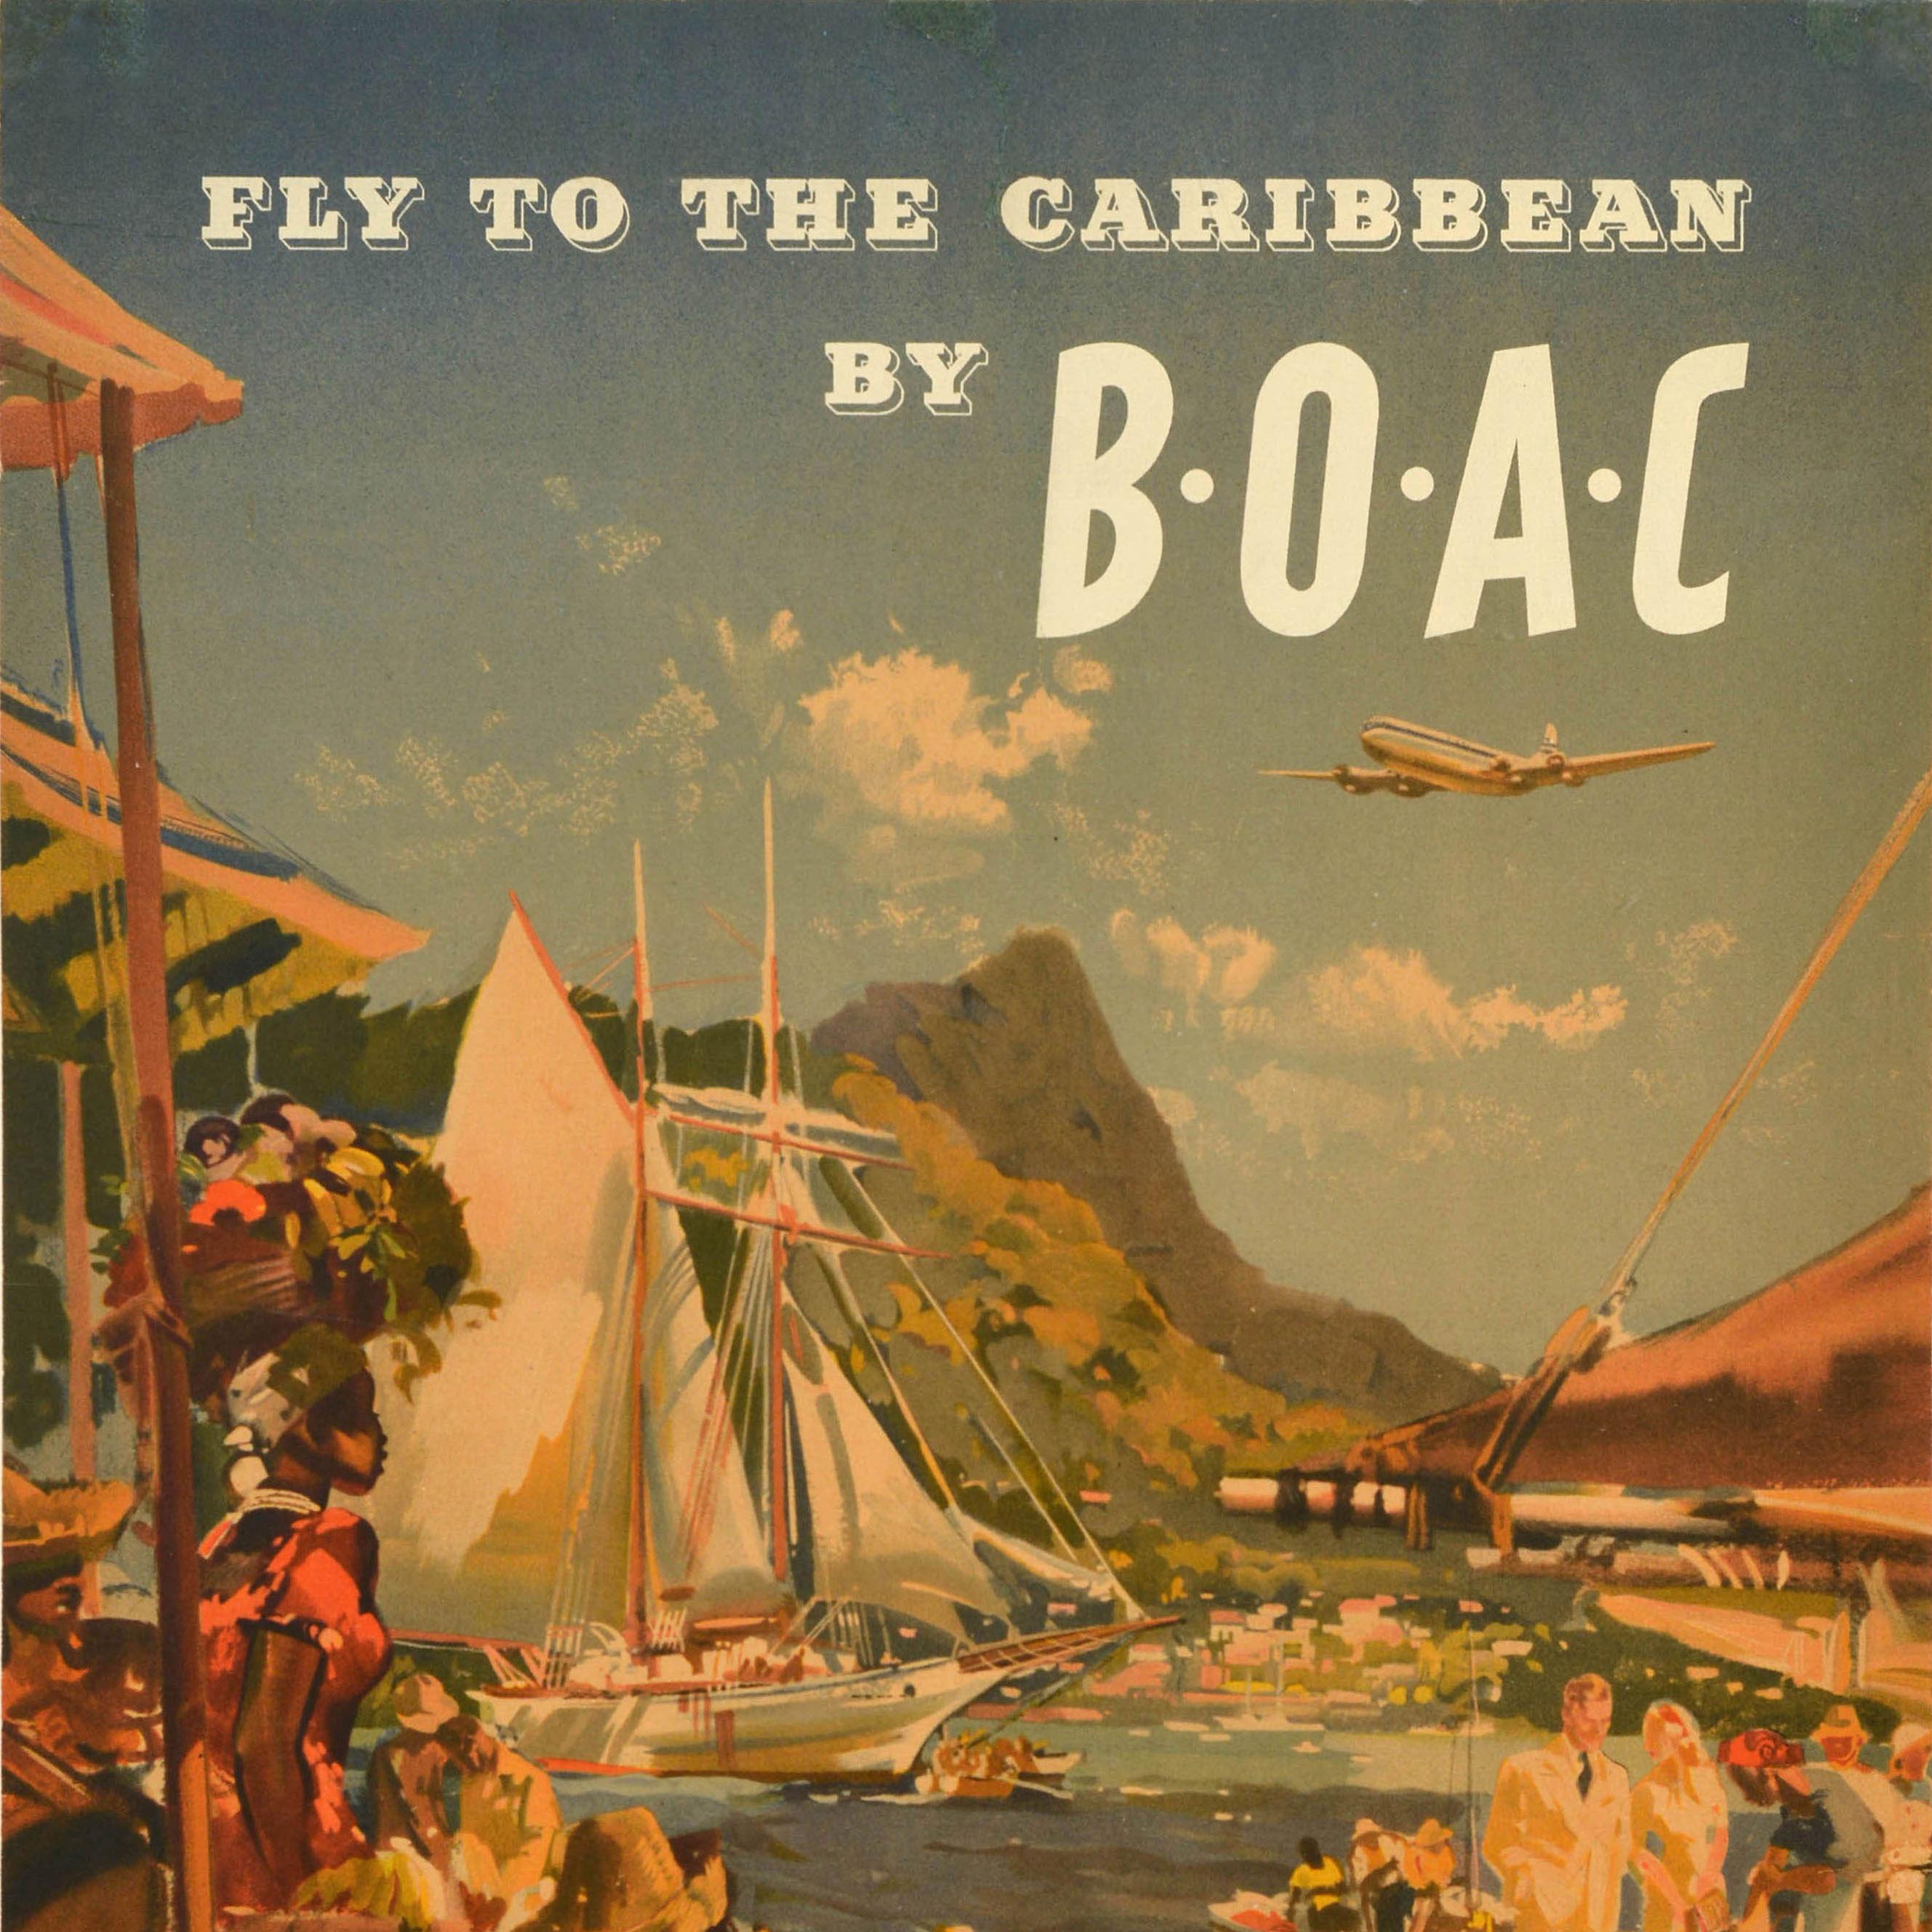 Original vintage travel advertising poster - Fly to the Caribbean by BOAC - featuring a colourful illustration by the notable British painter and illustrator Frank Wootton (1911-1998) depicting tourists in a busy fruit and vegetable market on a